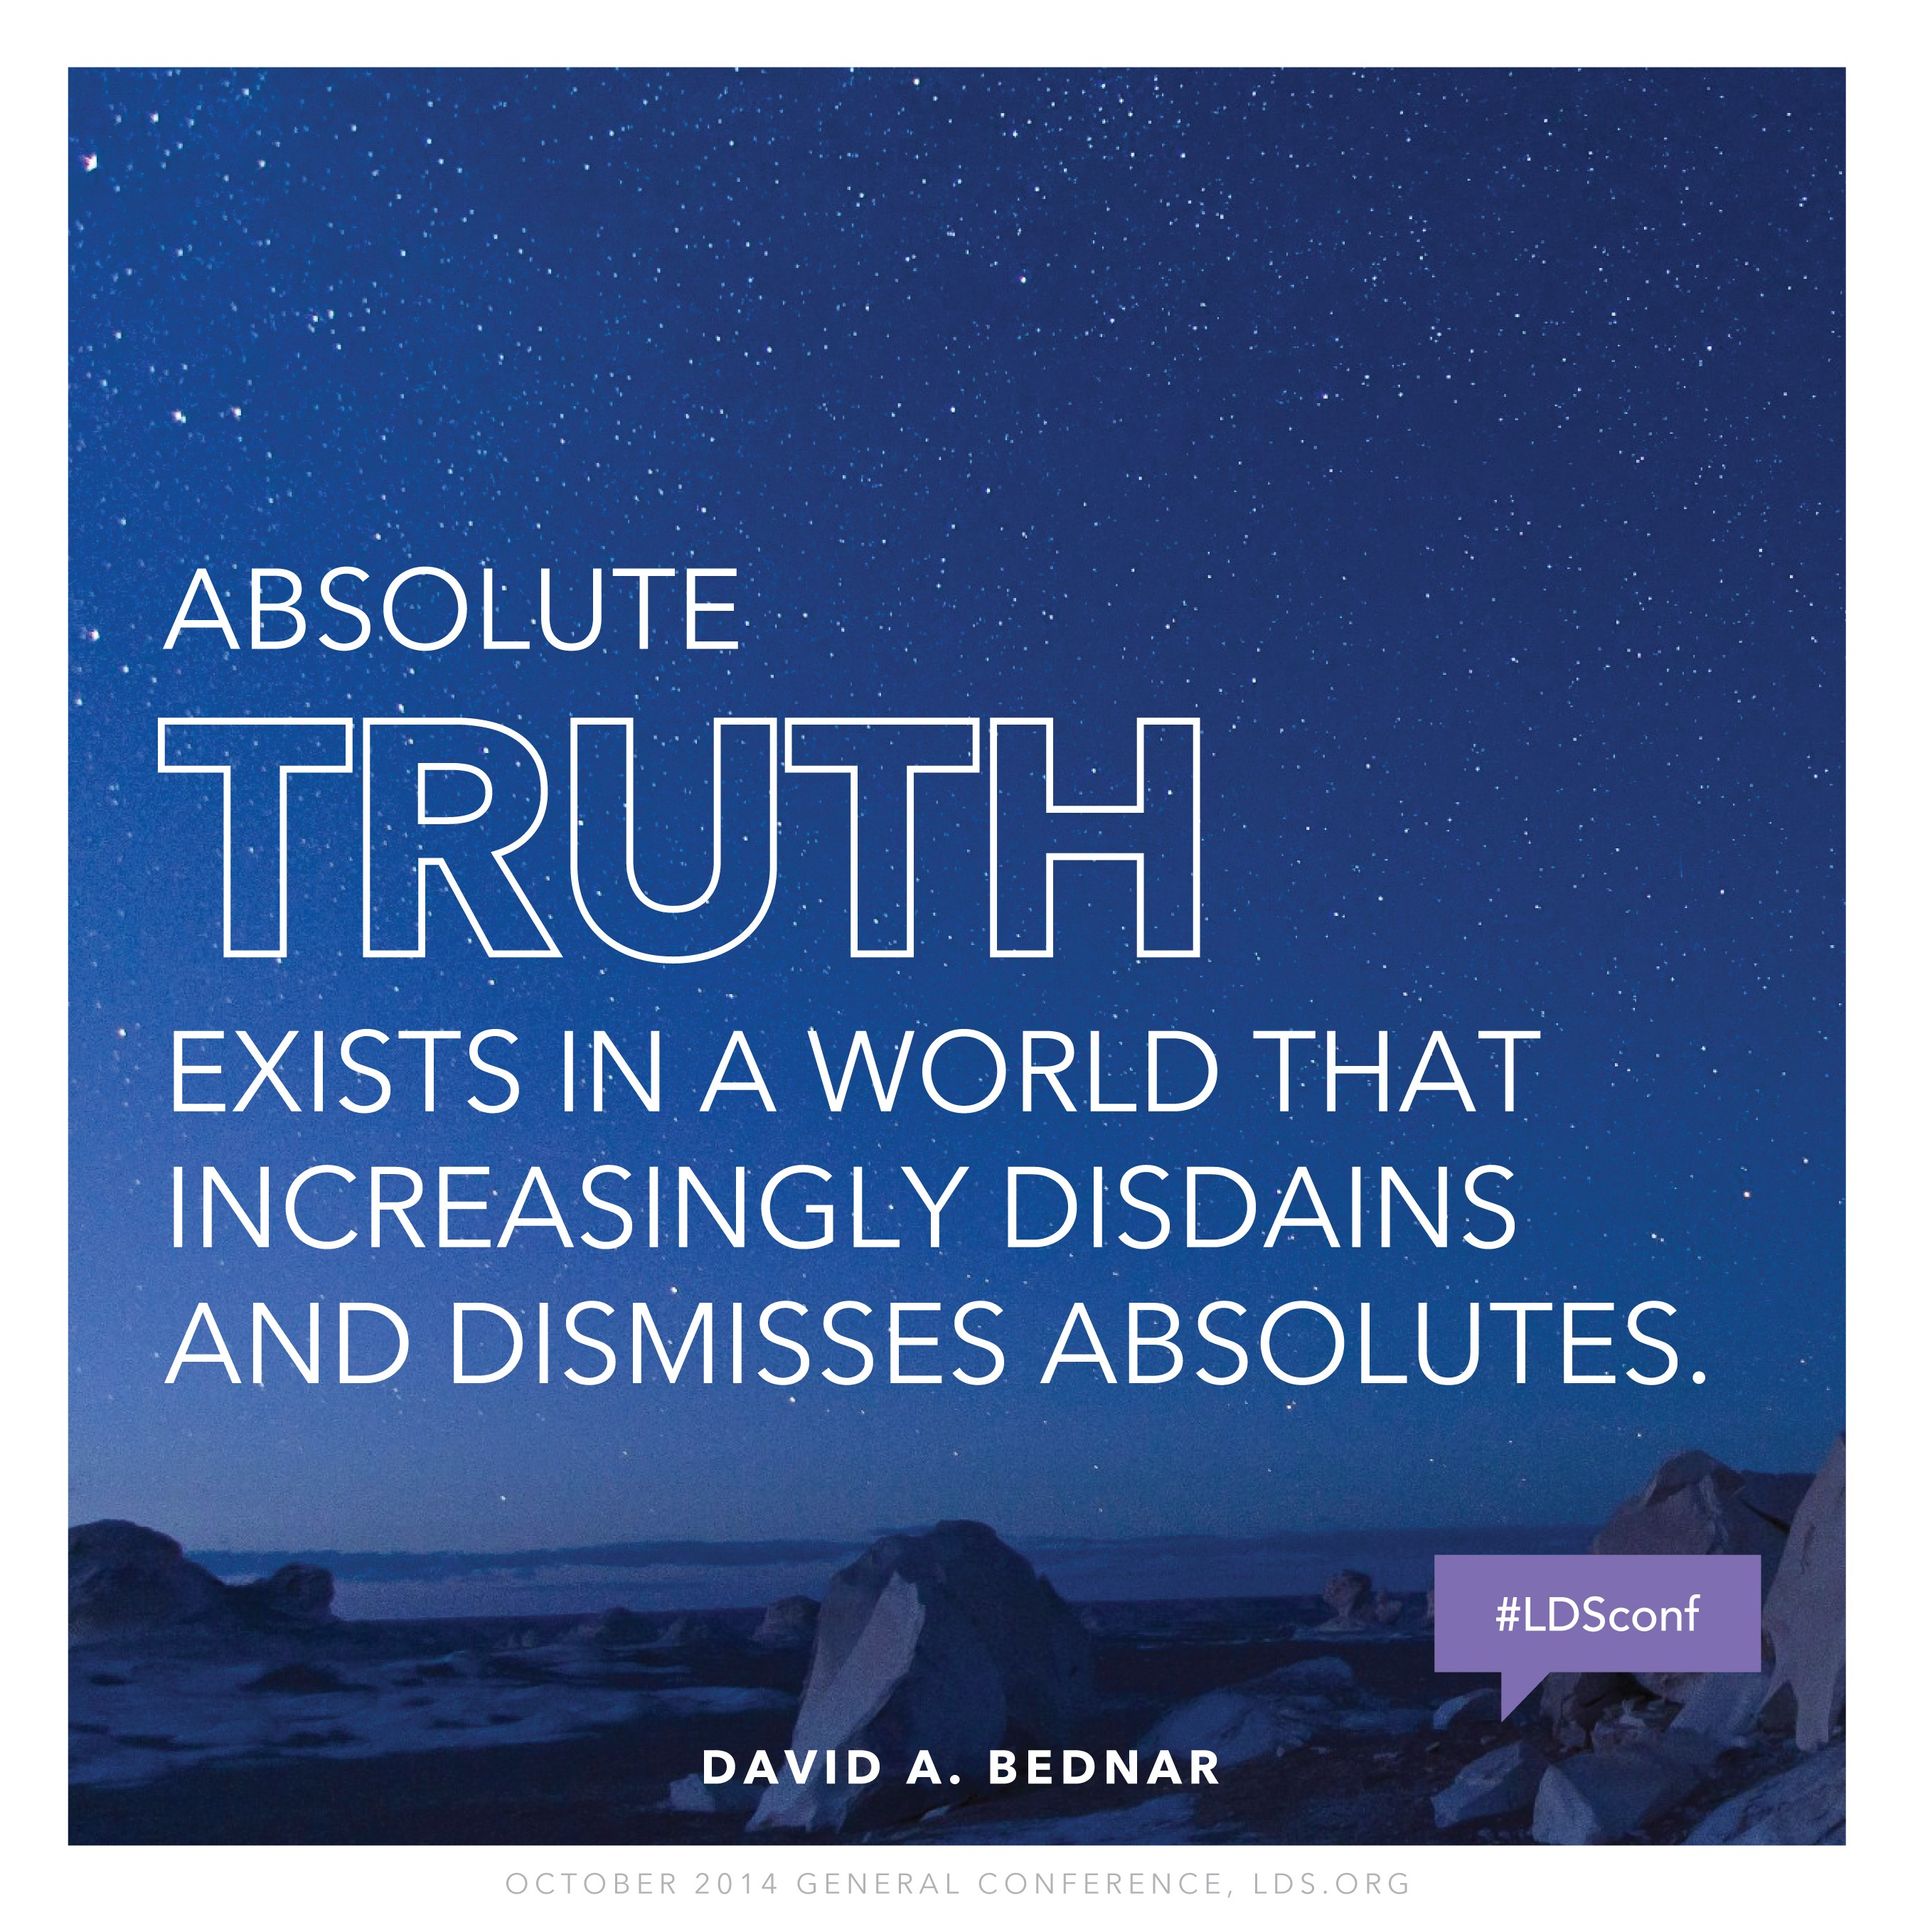 “Absolute truth exists in a world that increasingly disdains and dismisses absolutes.”—Elder David A. Bednar, “Come and See” © undefined ipCode 1.